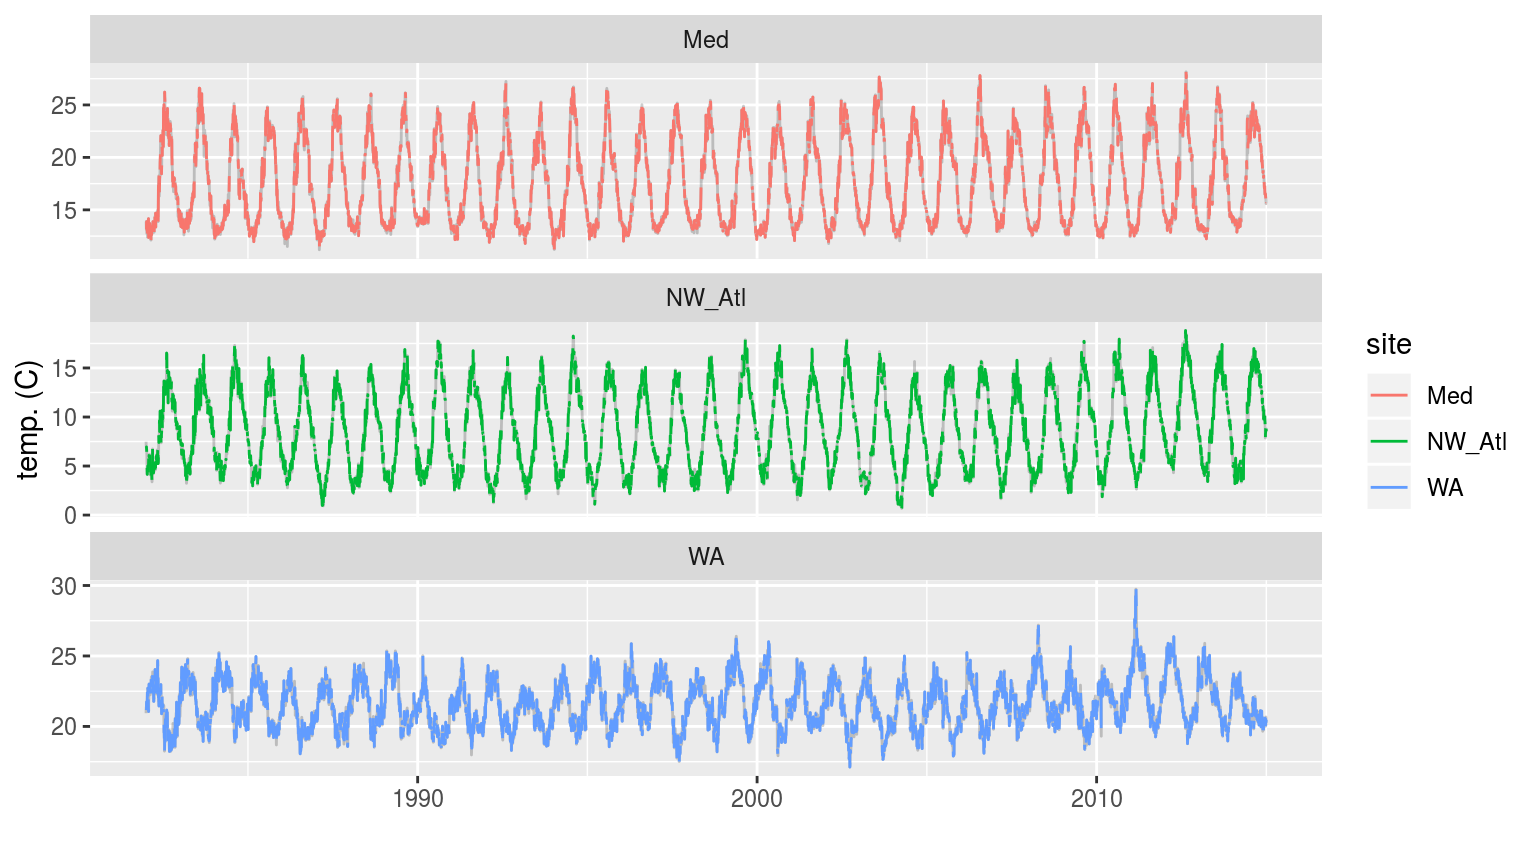 The three time series when weekend days have been removed. The complete time series is shown behind as a faint grey line.